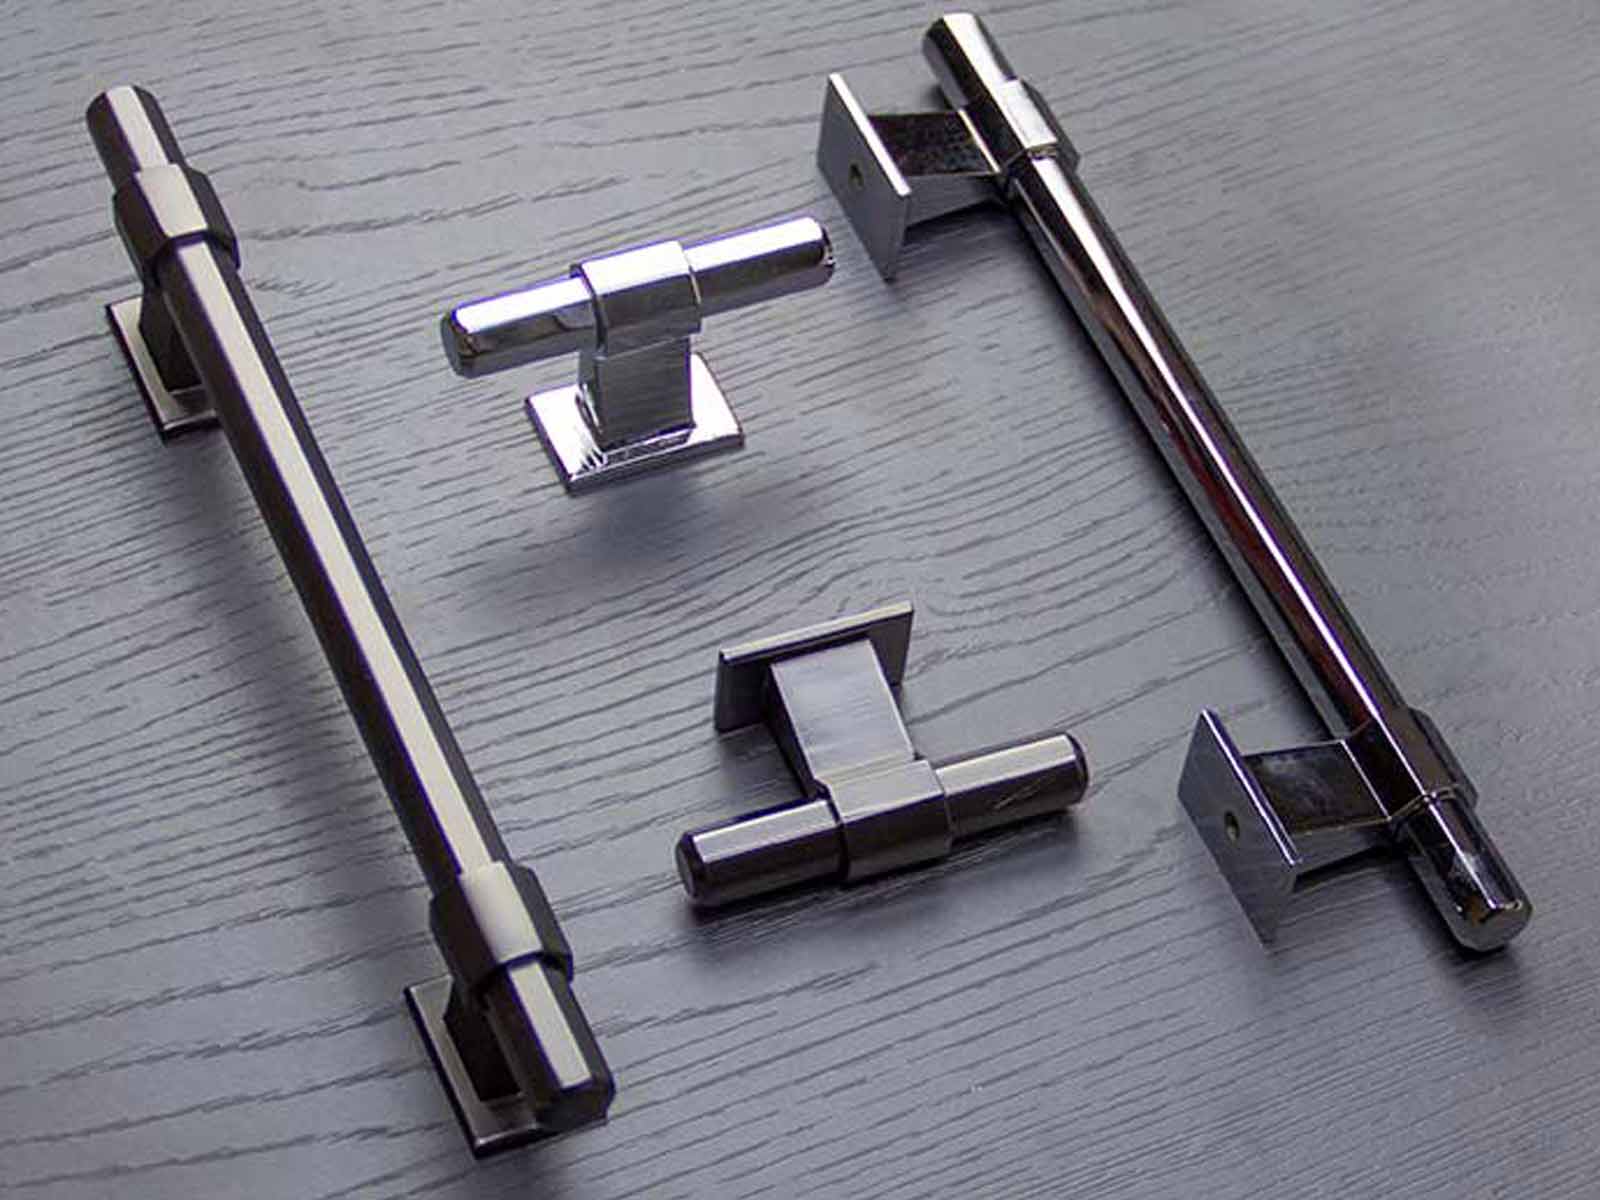 T handles for kitchen cabinets in a metallic finish